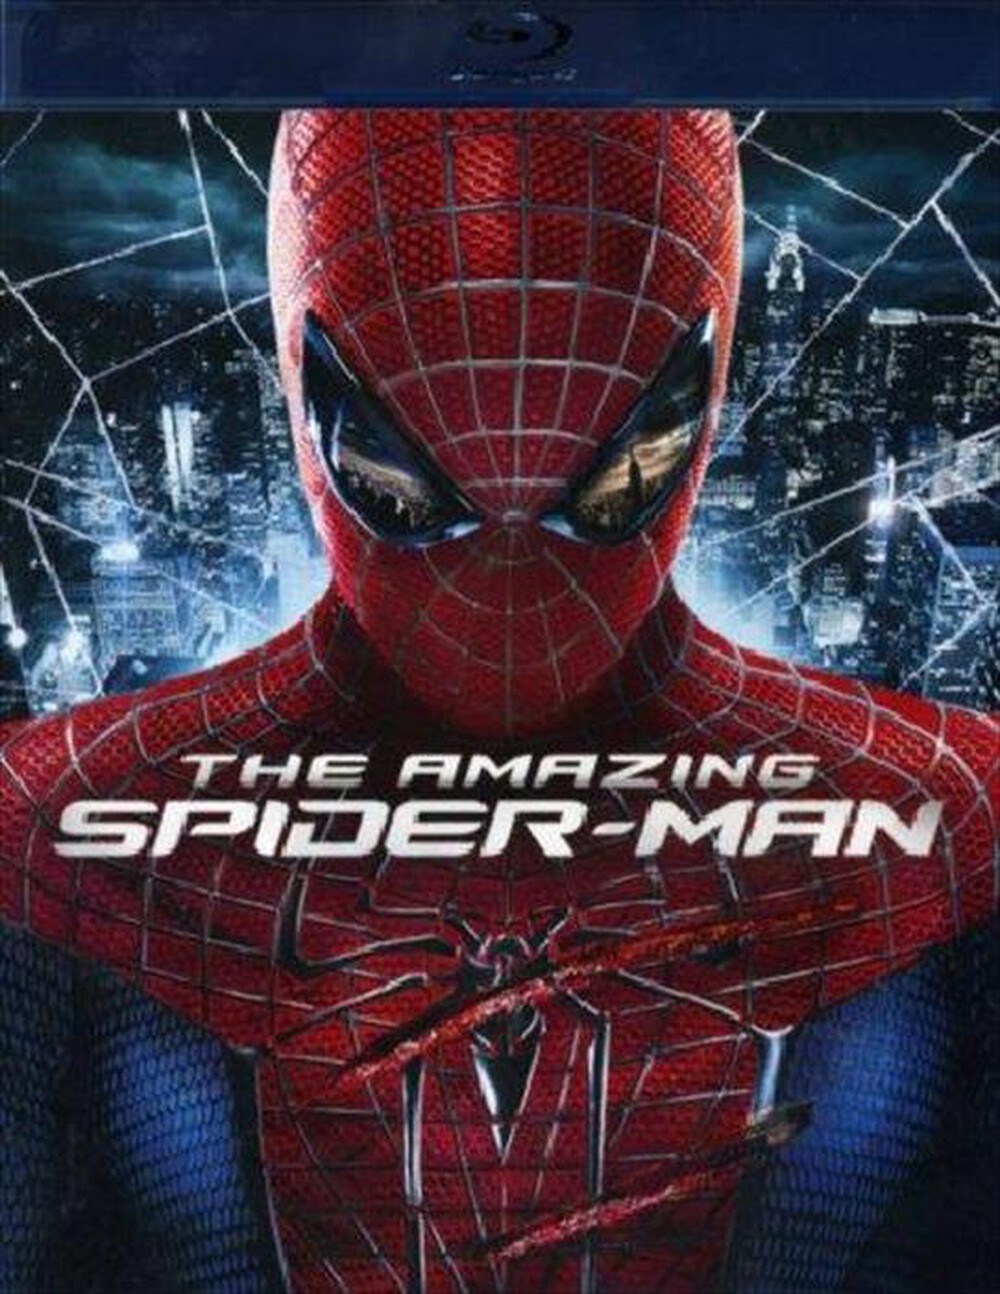 "EAGLE PICTURES - Amazing Spider-Man (The)"